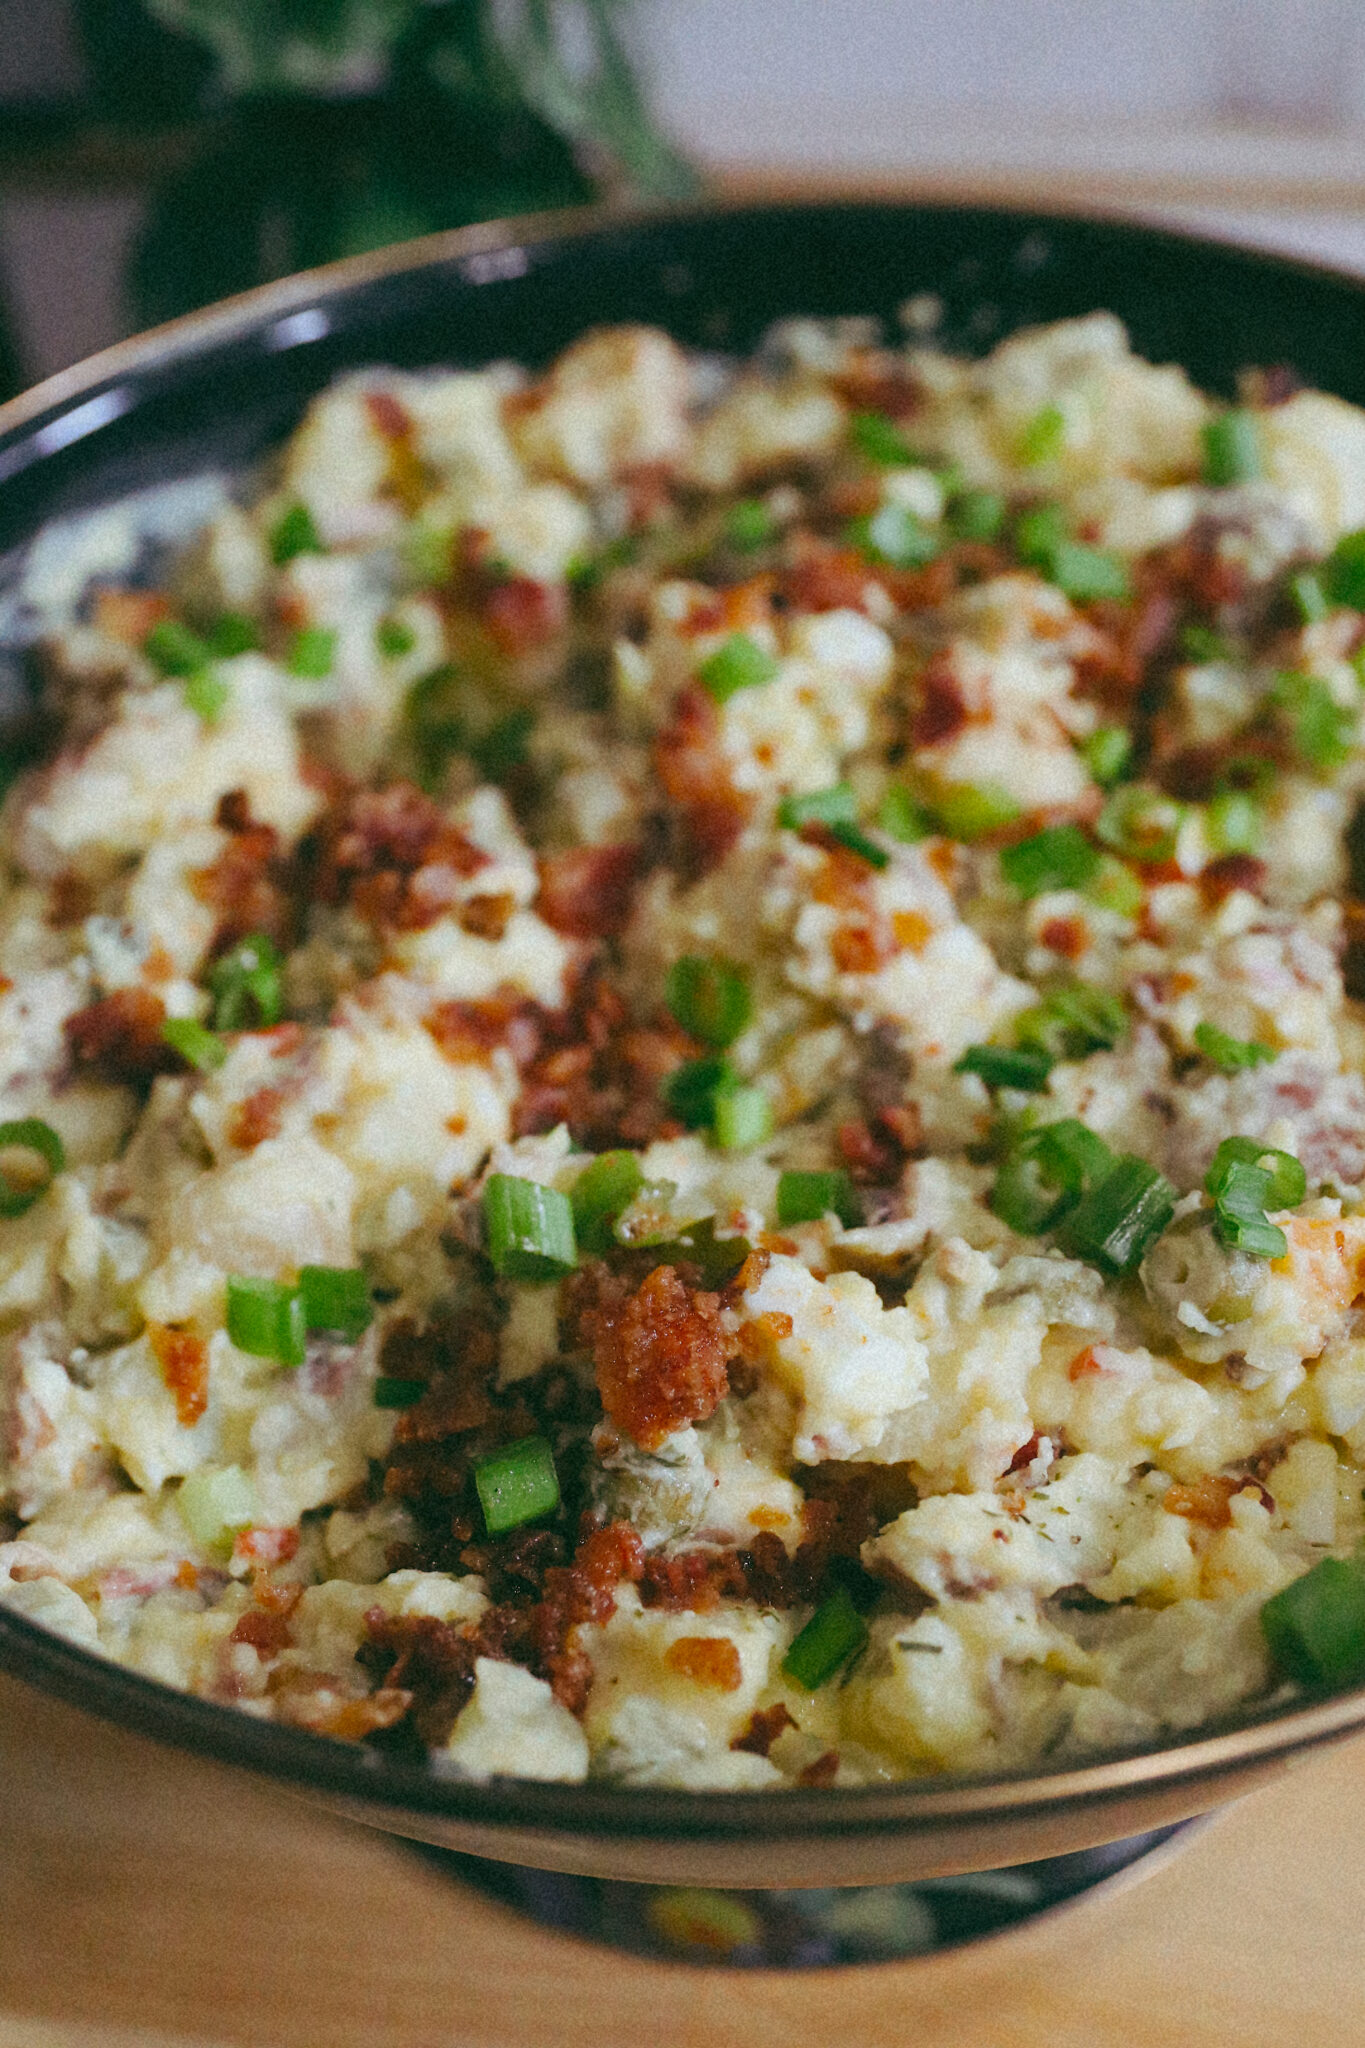 Top Nashville Lifestyle blogger, Nashville Wifestyles shares her Summer Eats: Delicious Potato Salad Recipe! Keep reading to see how to make it! 